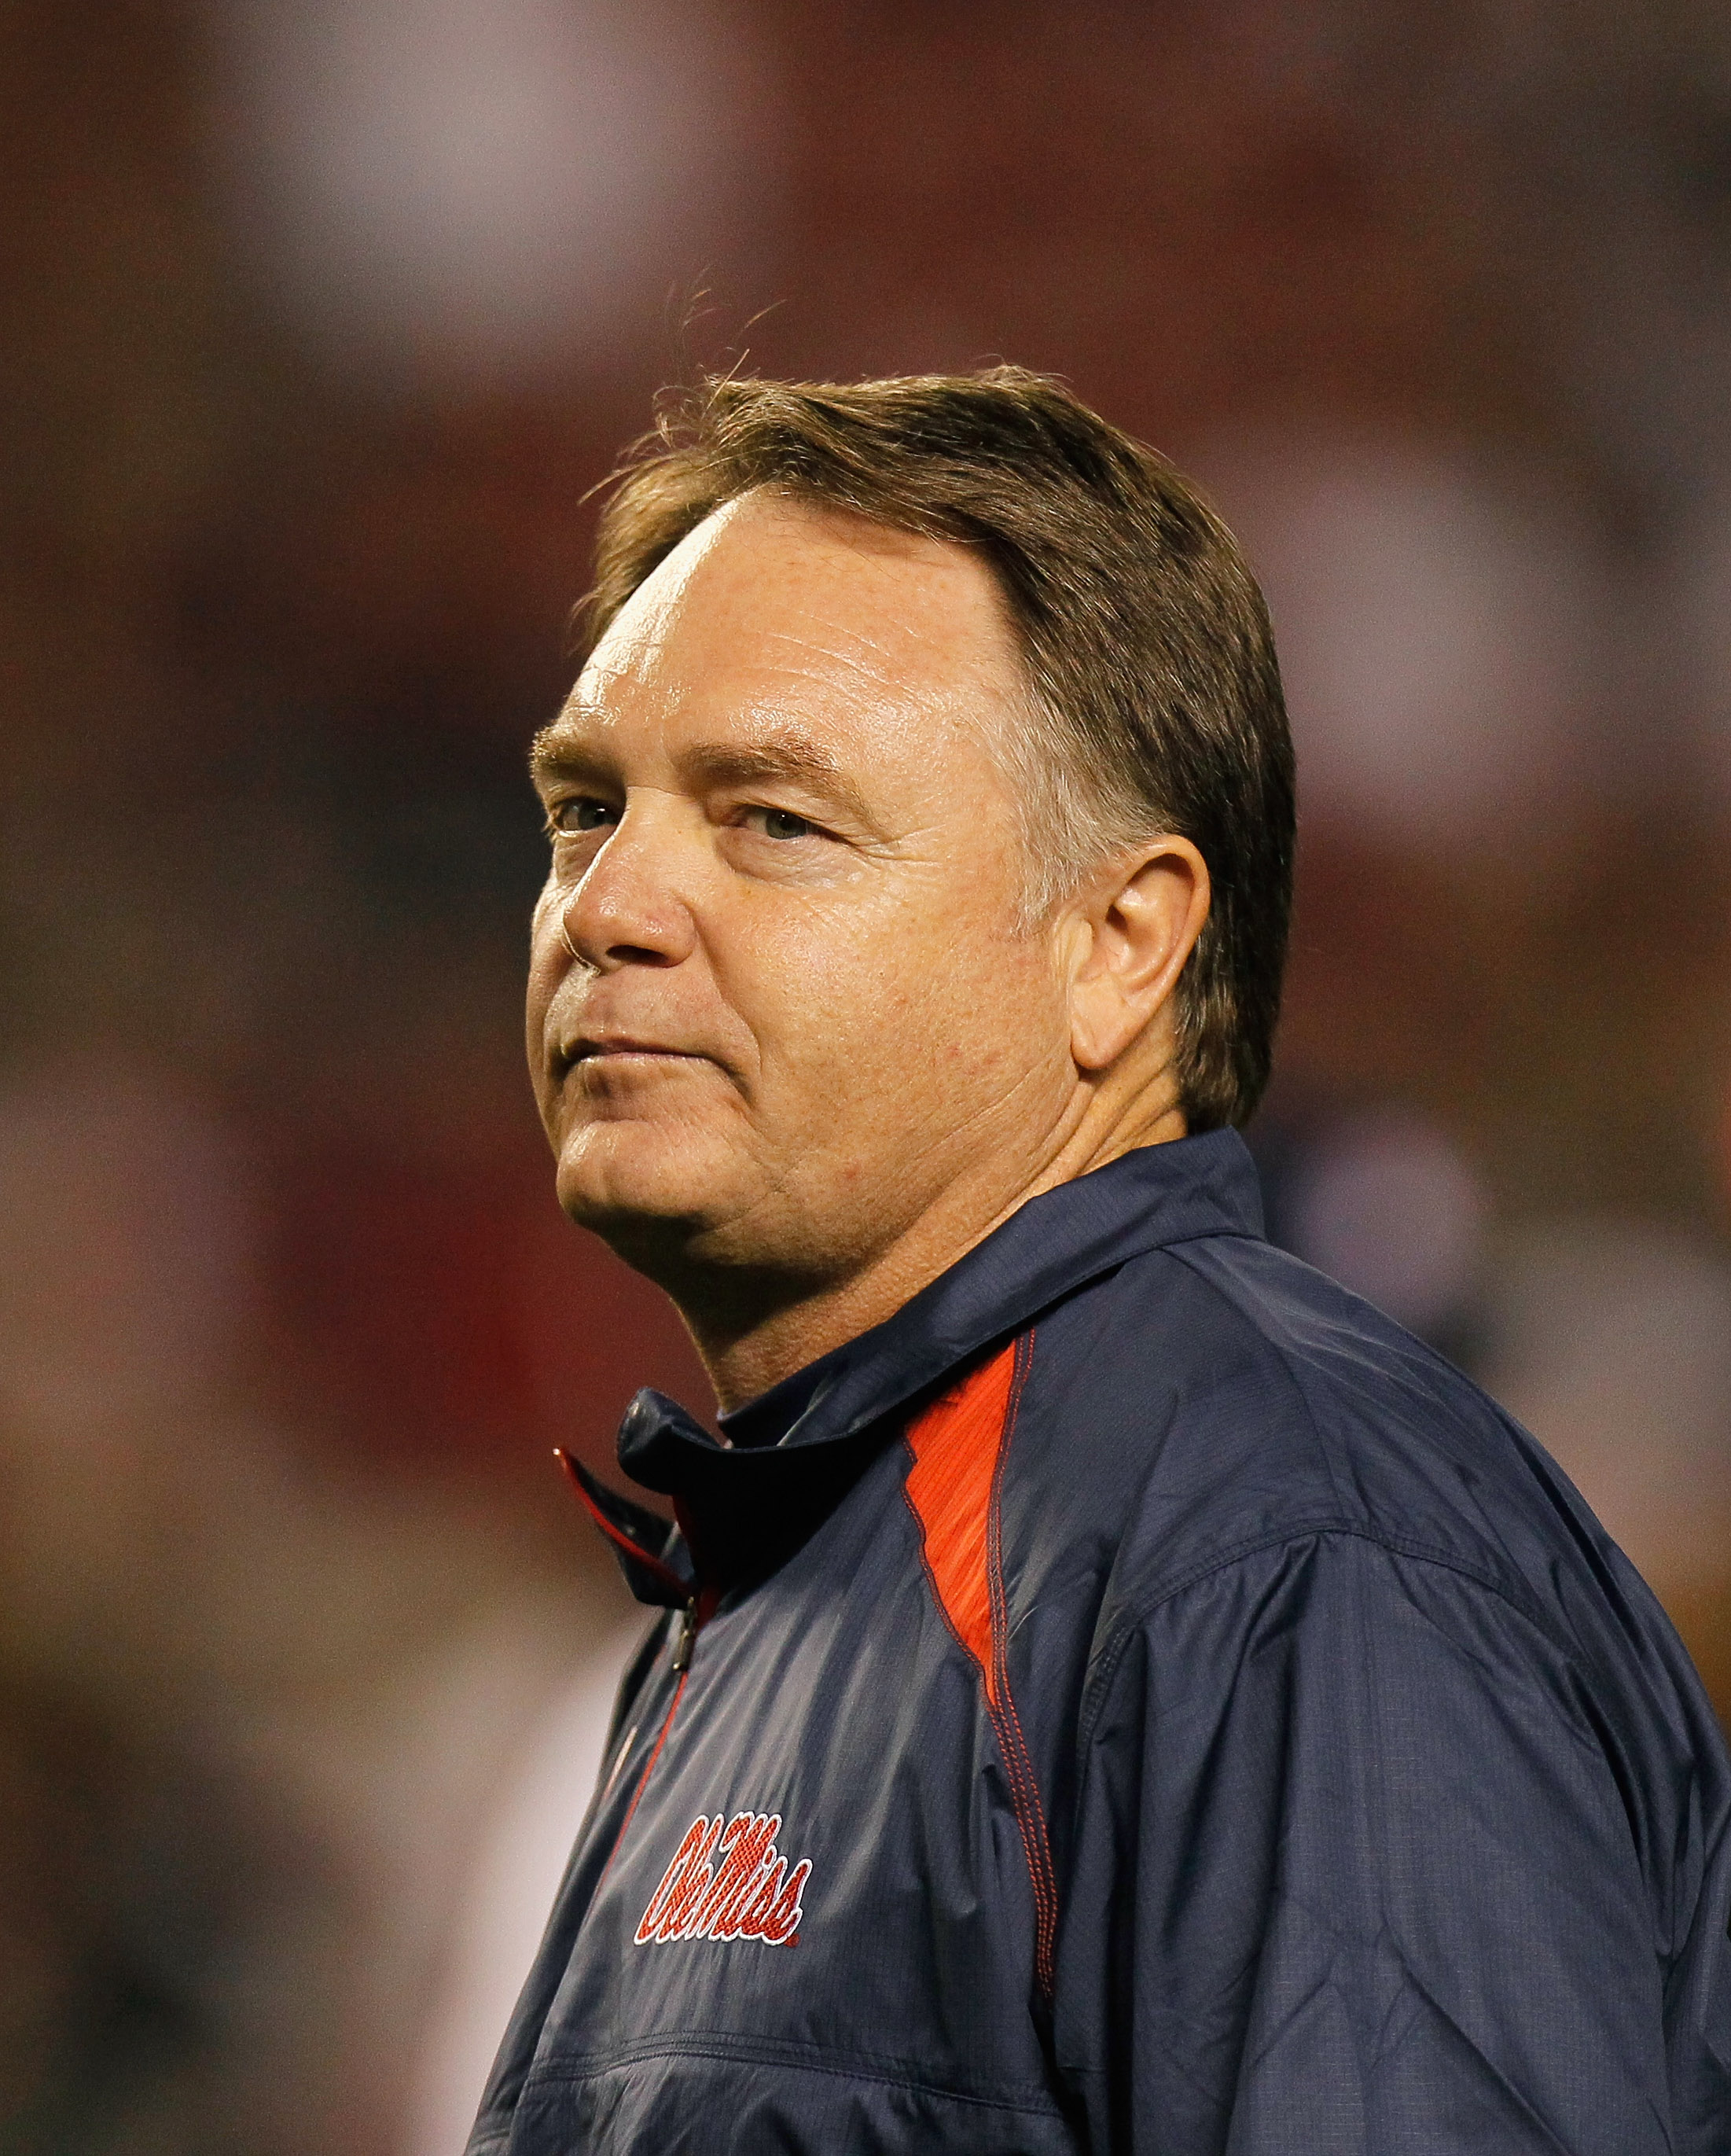 TUSCALOOSA, AL - OCTOBER 16:  Head coach Houston Nutt of the Ole Miss Rebels against the Alabama Crimson Tide at Bryant-Denny Stadium on October 16, 2010 in Tuscaloosa, Alabama.  (Photo by Kevin C. Cox/Getty Images)